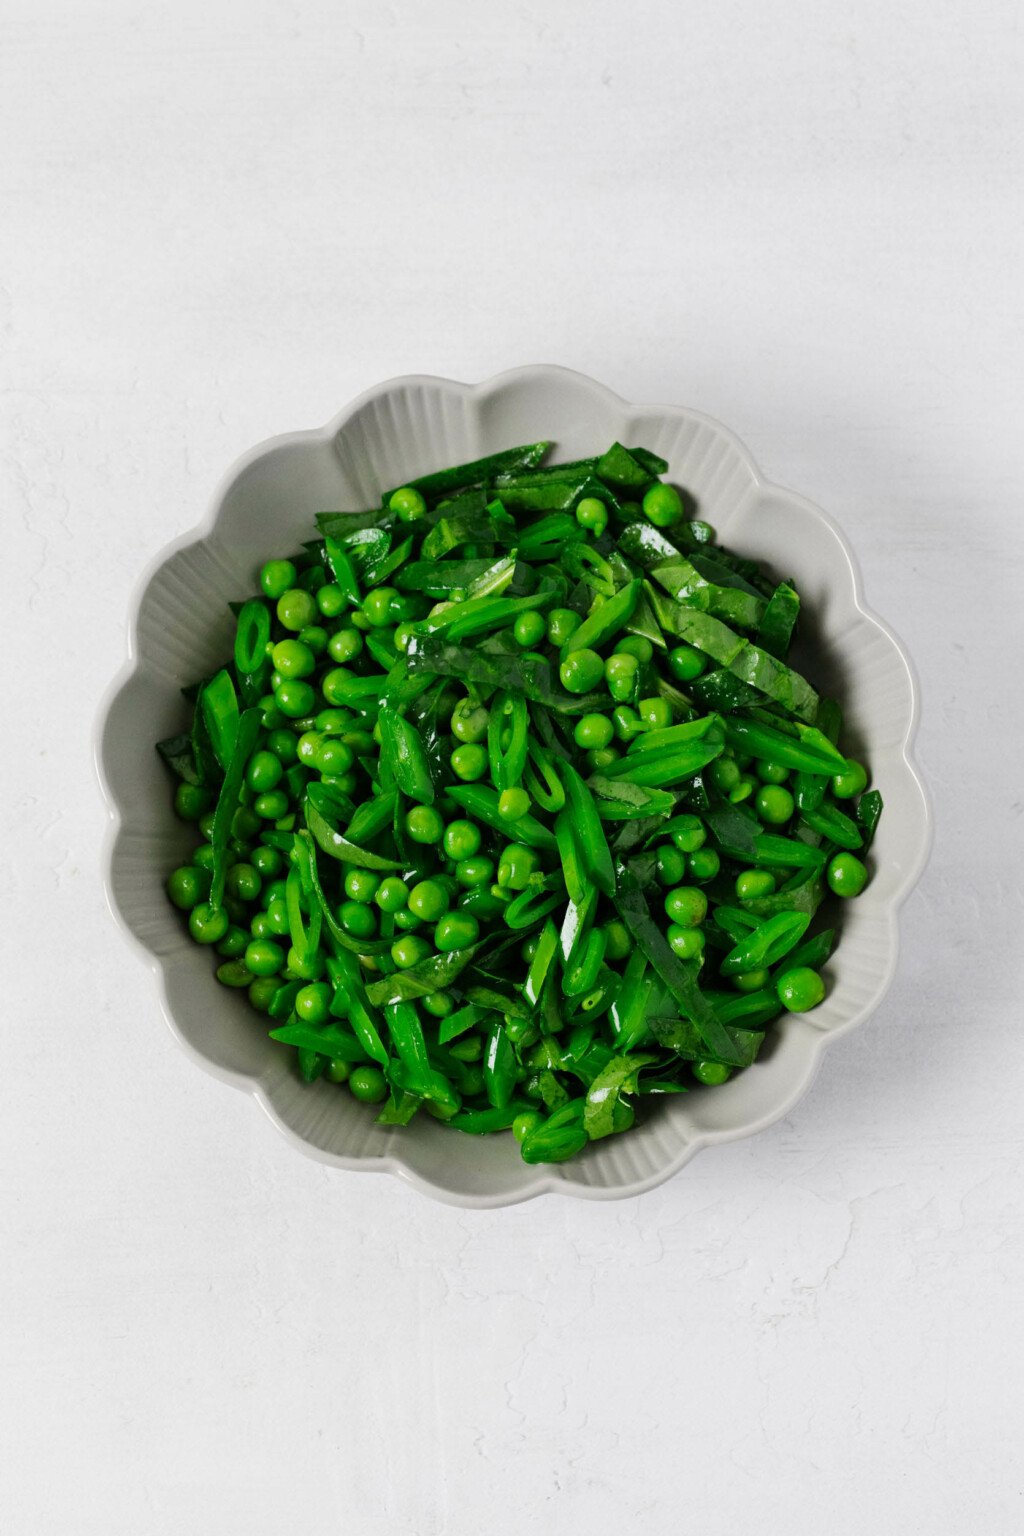 A round, fluted white bowl is filled with bright green, fresh peas and thinly sliced snap peas, along with spinach. The vegetables glisten lightly with a vinaigrette.